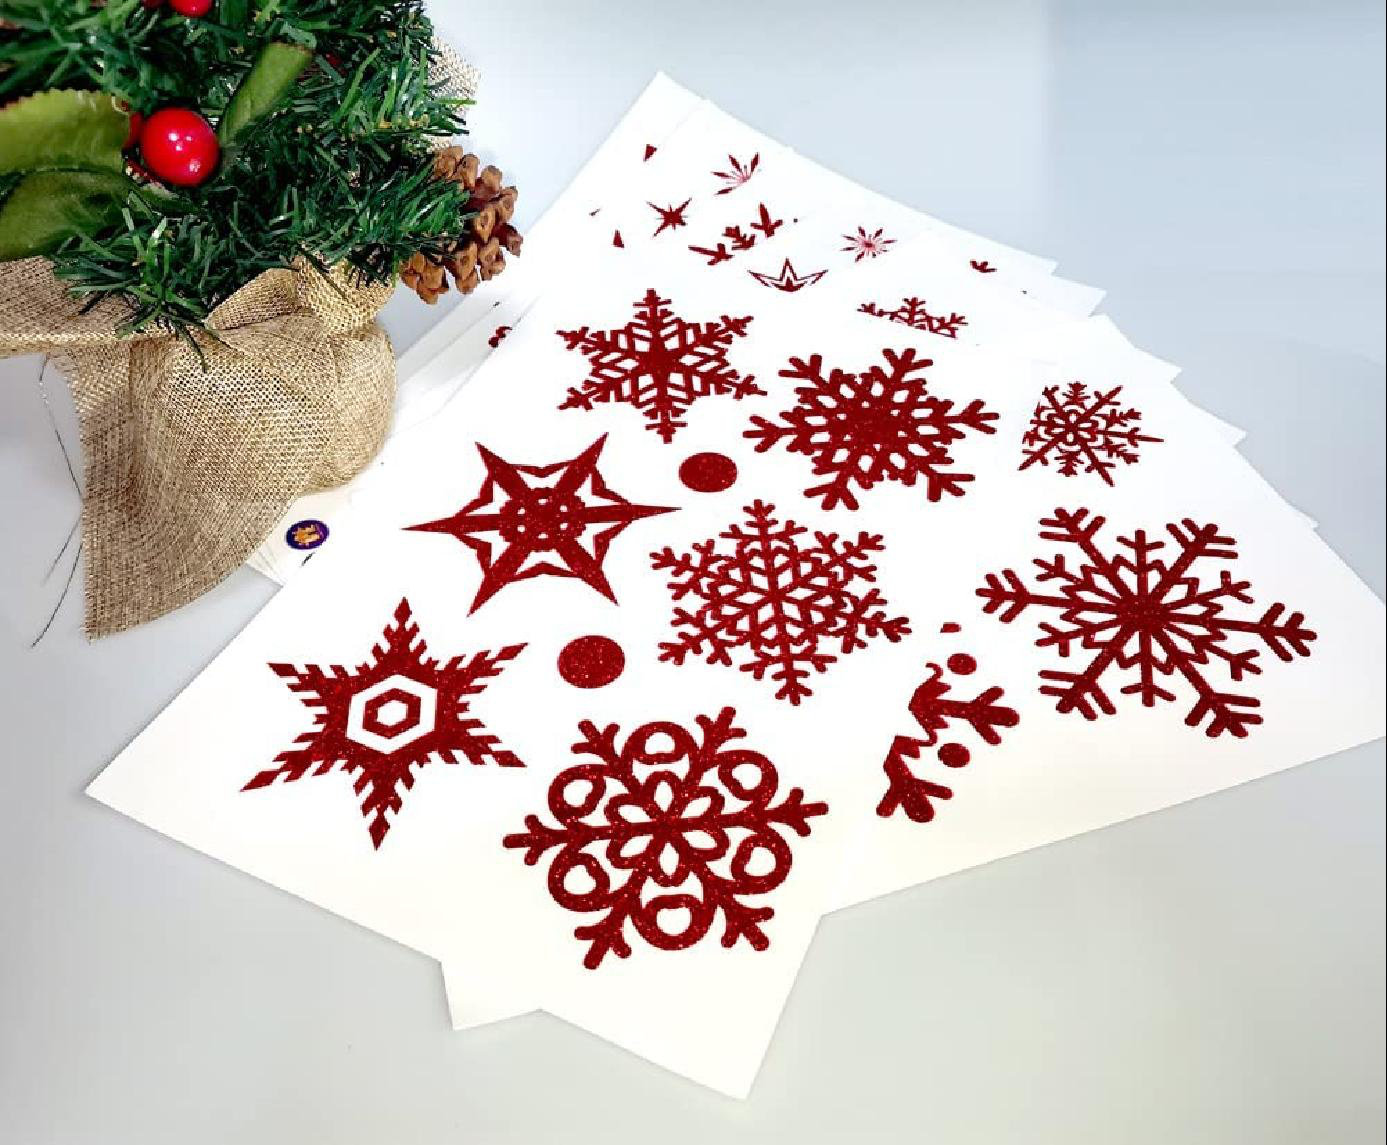 Set of 2 Holiday Tea Towels Featuring Snowflake & Gingerbread Prints